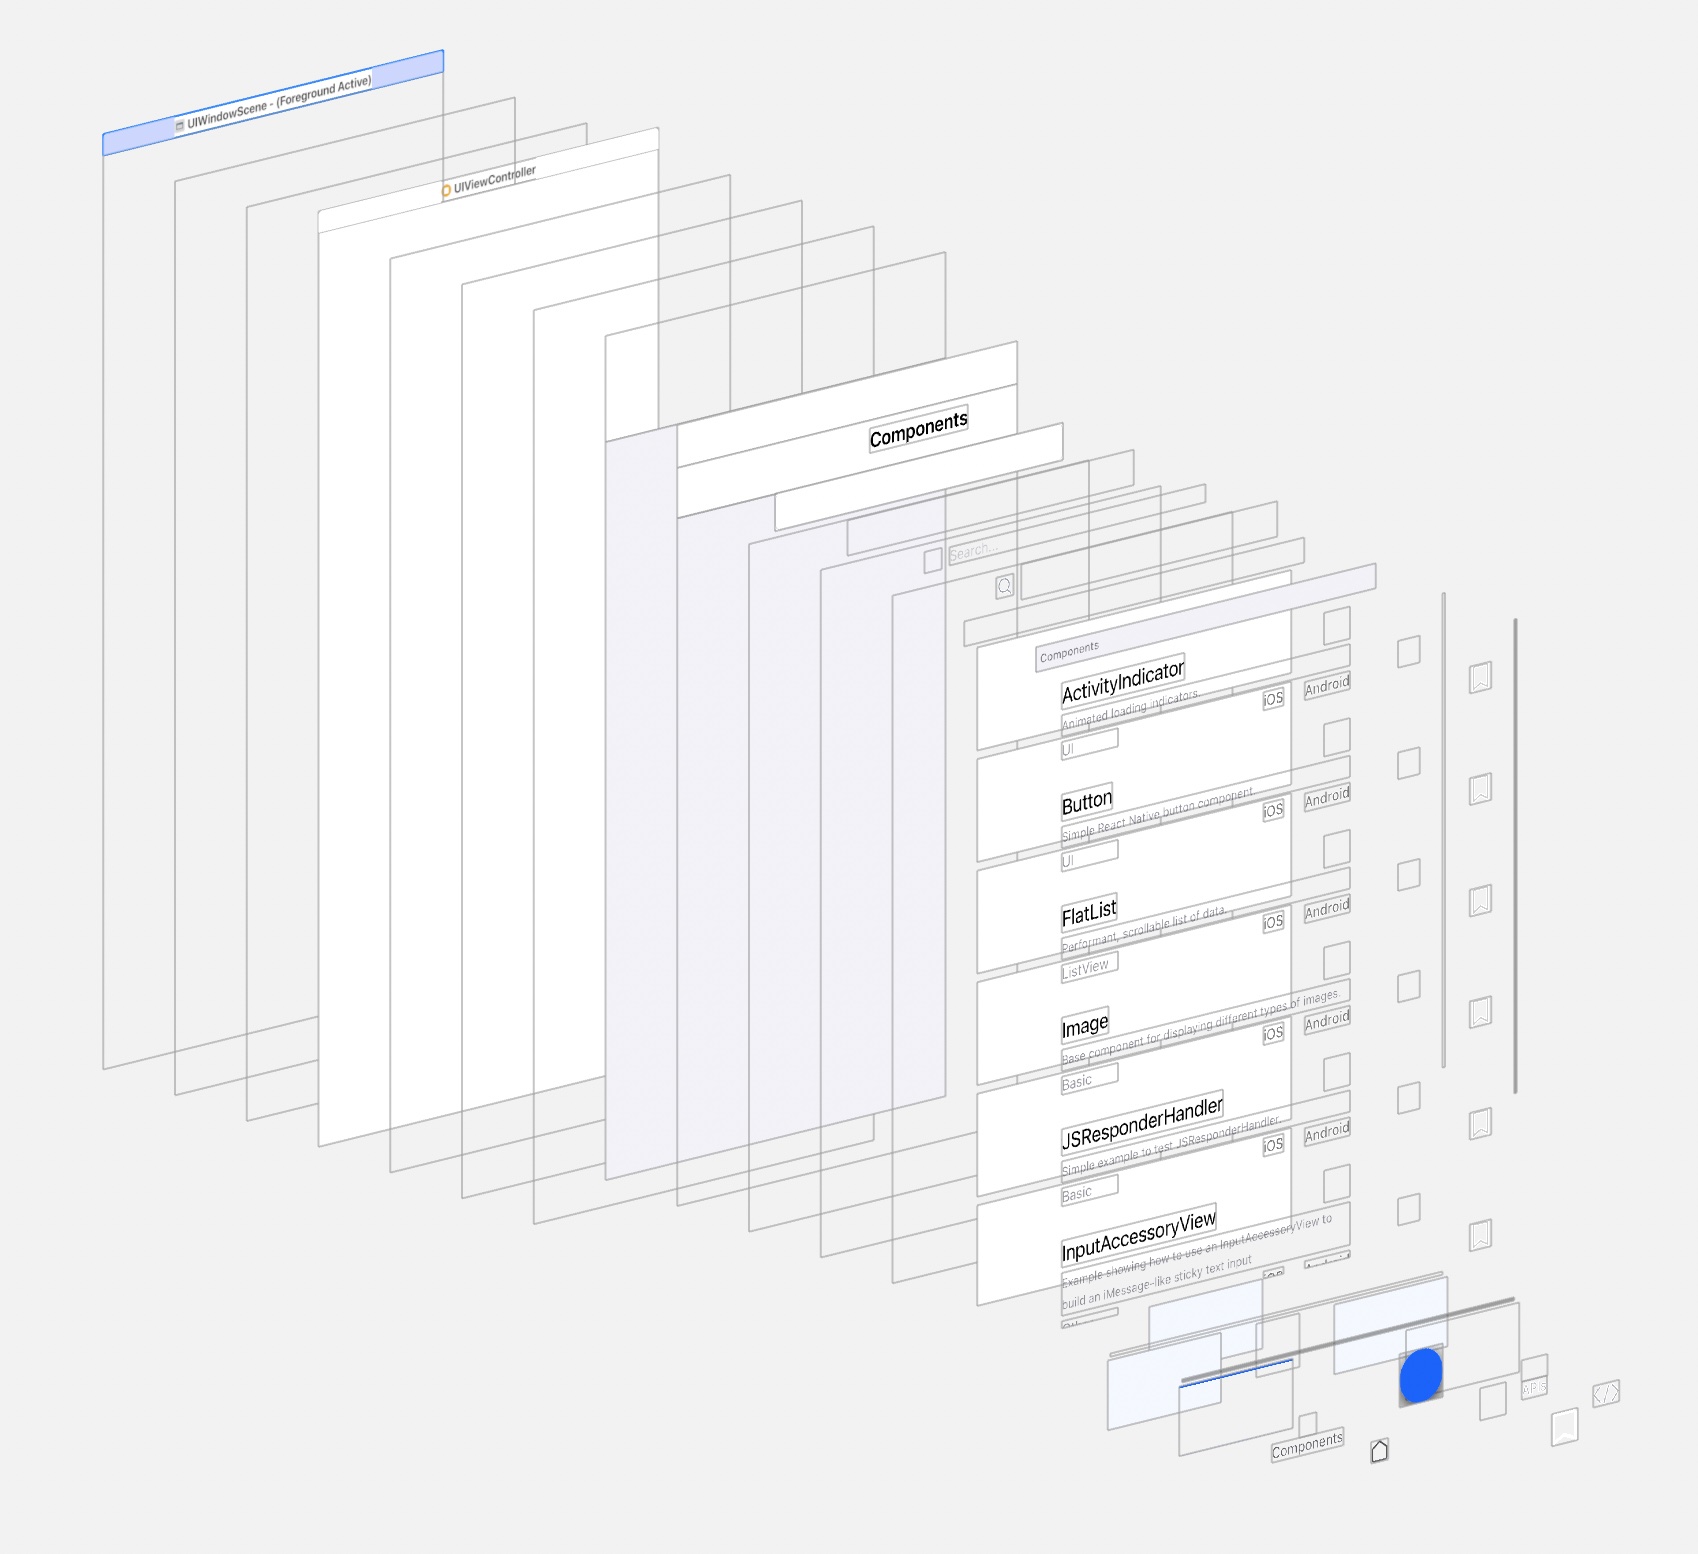 View hierarchy with view flattening